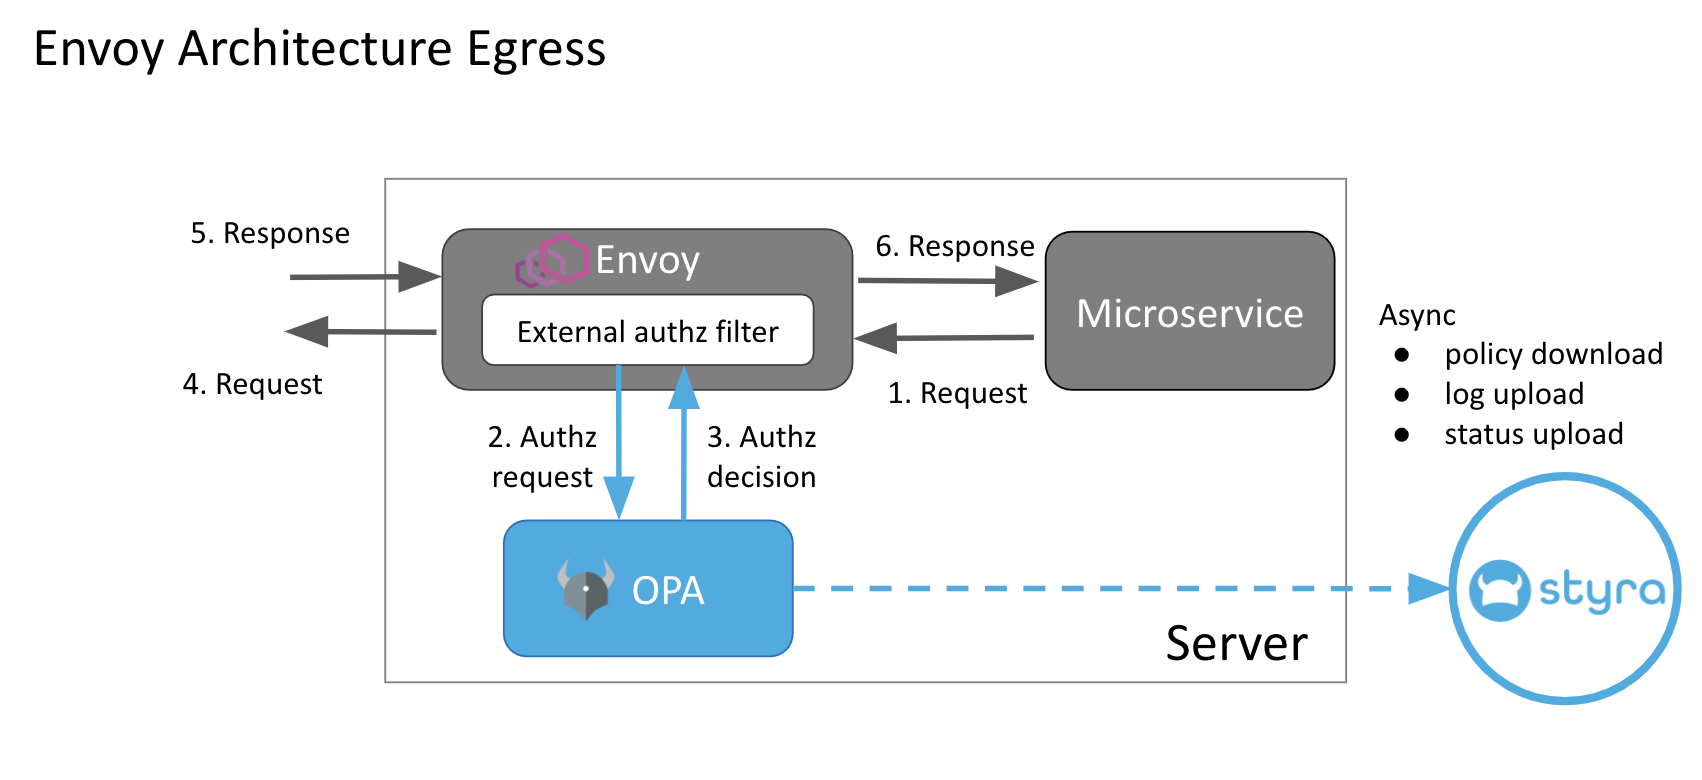 Envoy Architecture for Egress traffic